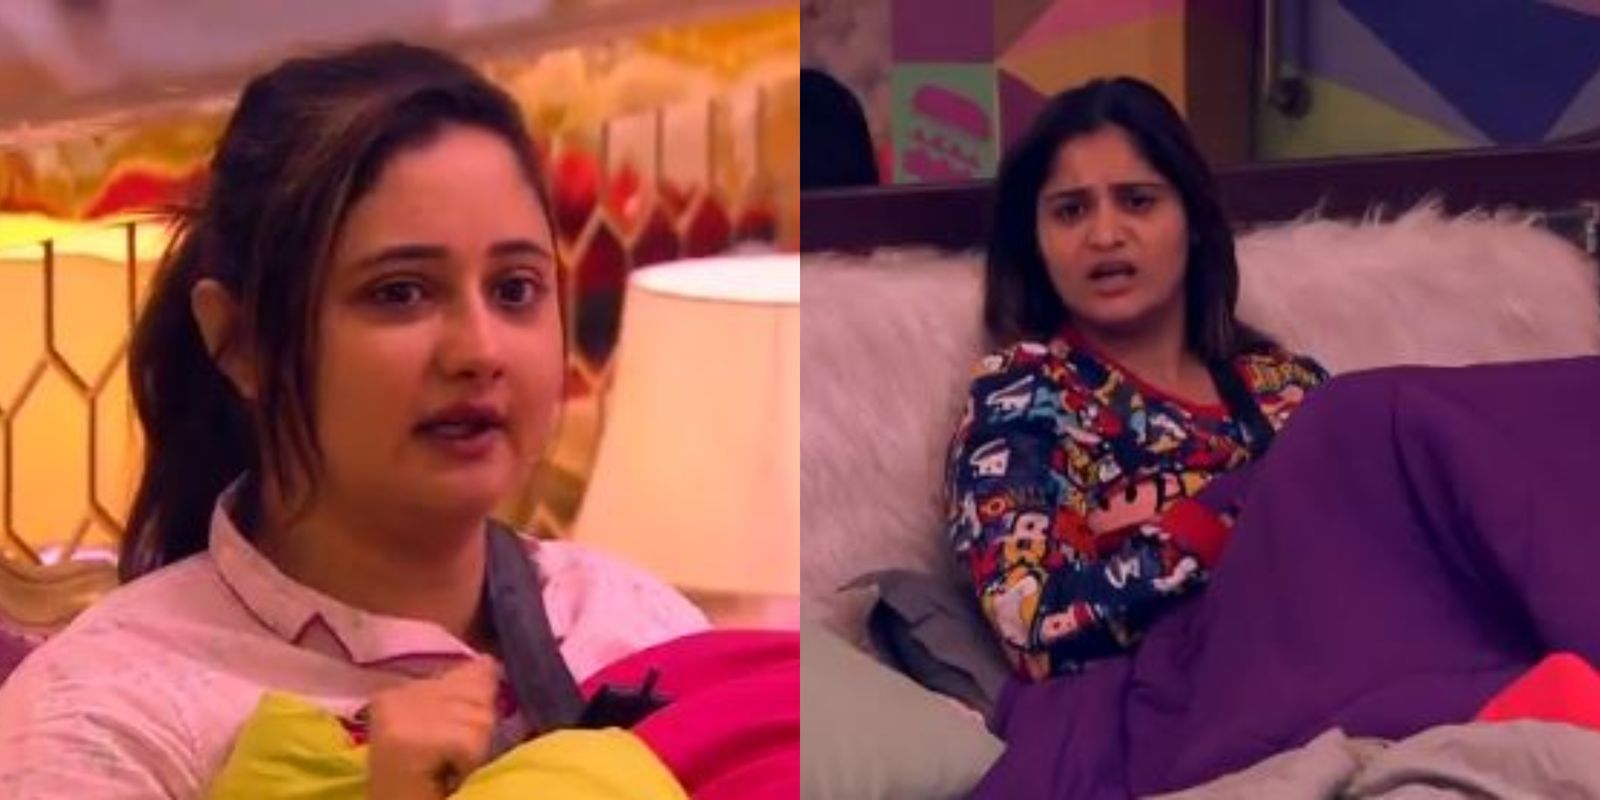 Bigg Boss 13: Rashami Desai Feels Let Down By Arti Singh For Not Defending Her, The Latter Tells Her It's A Personal Matter